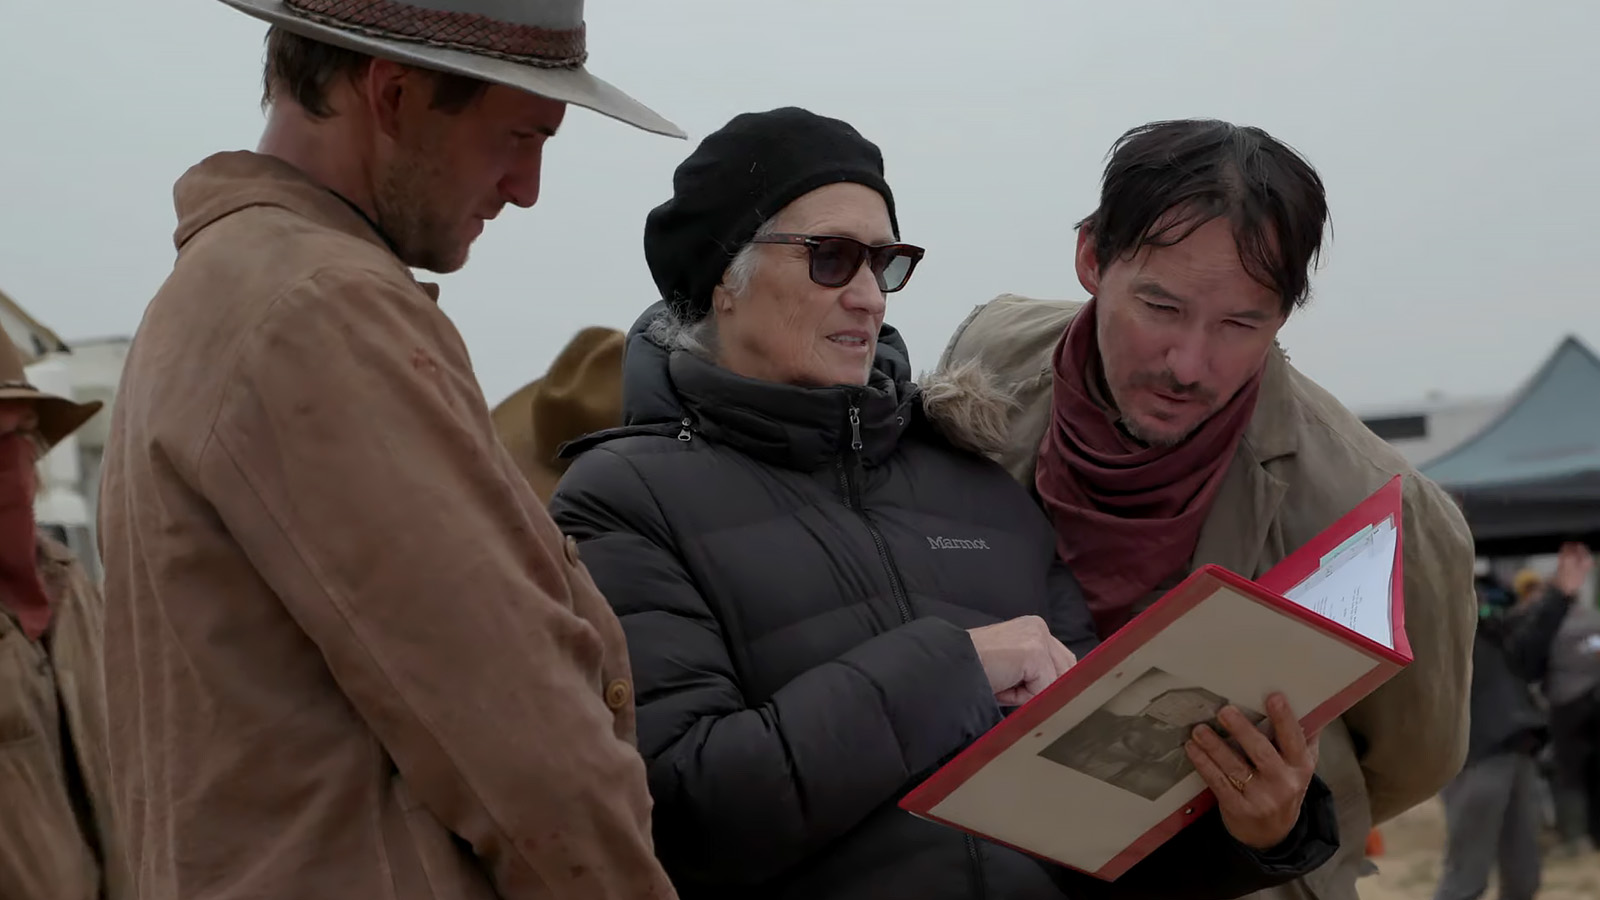 Director Jane Campion refers to her notes on location for The Power of the Dog. Image © Netflix